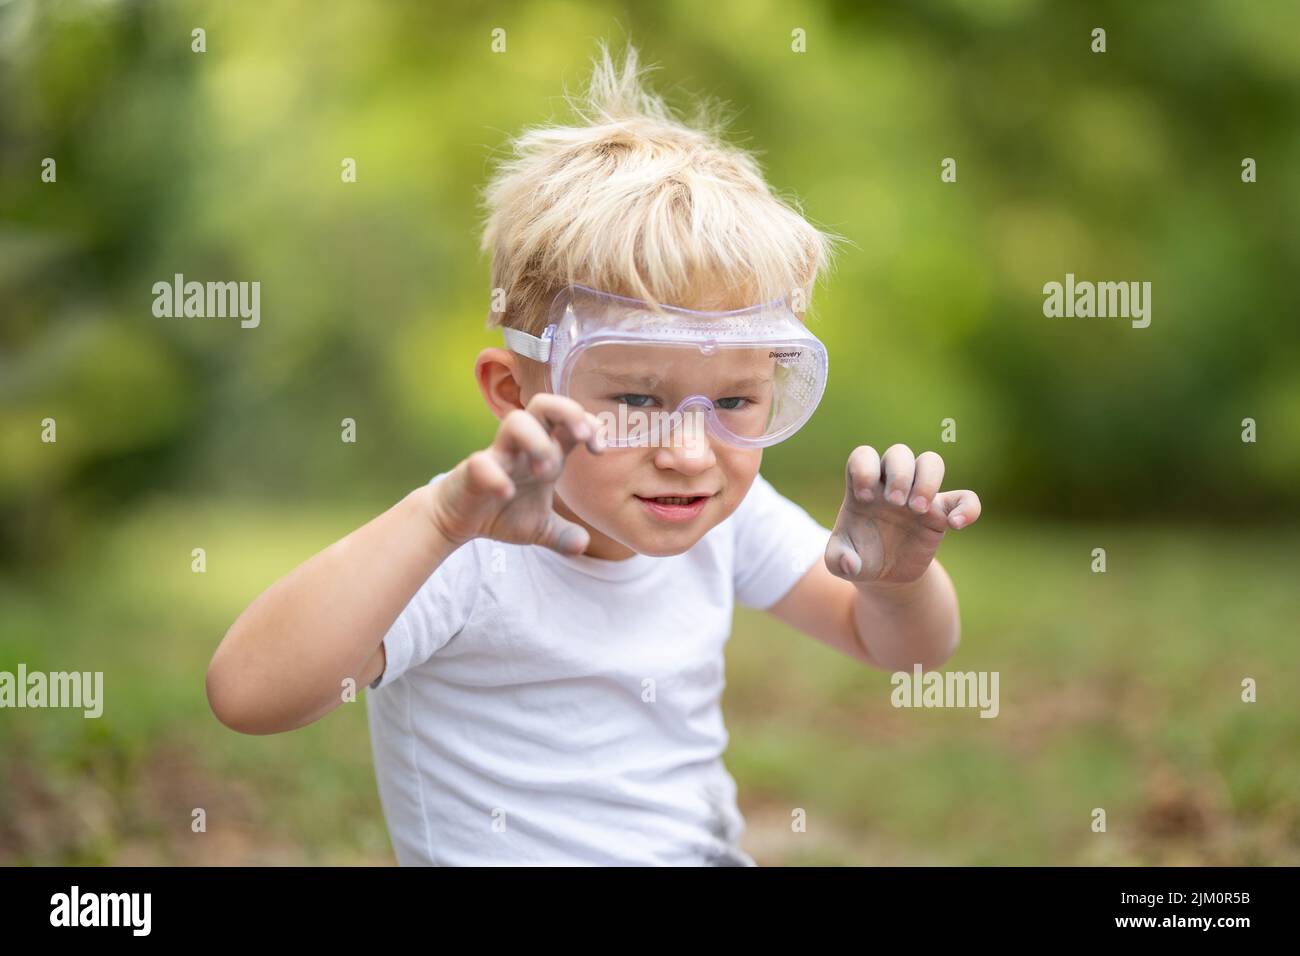 Boy playing in safety goggles Stock Photo